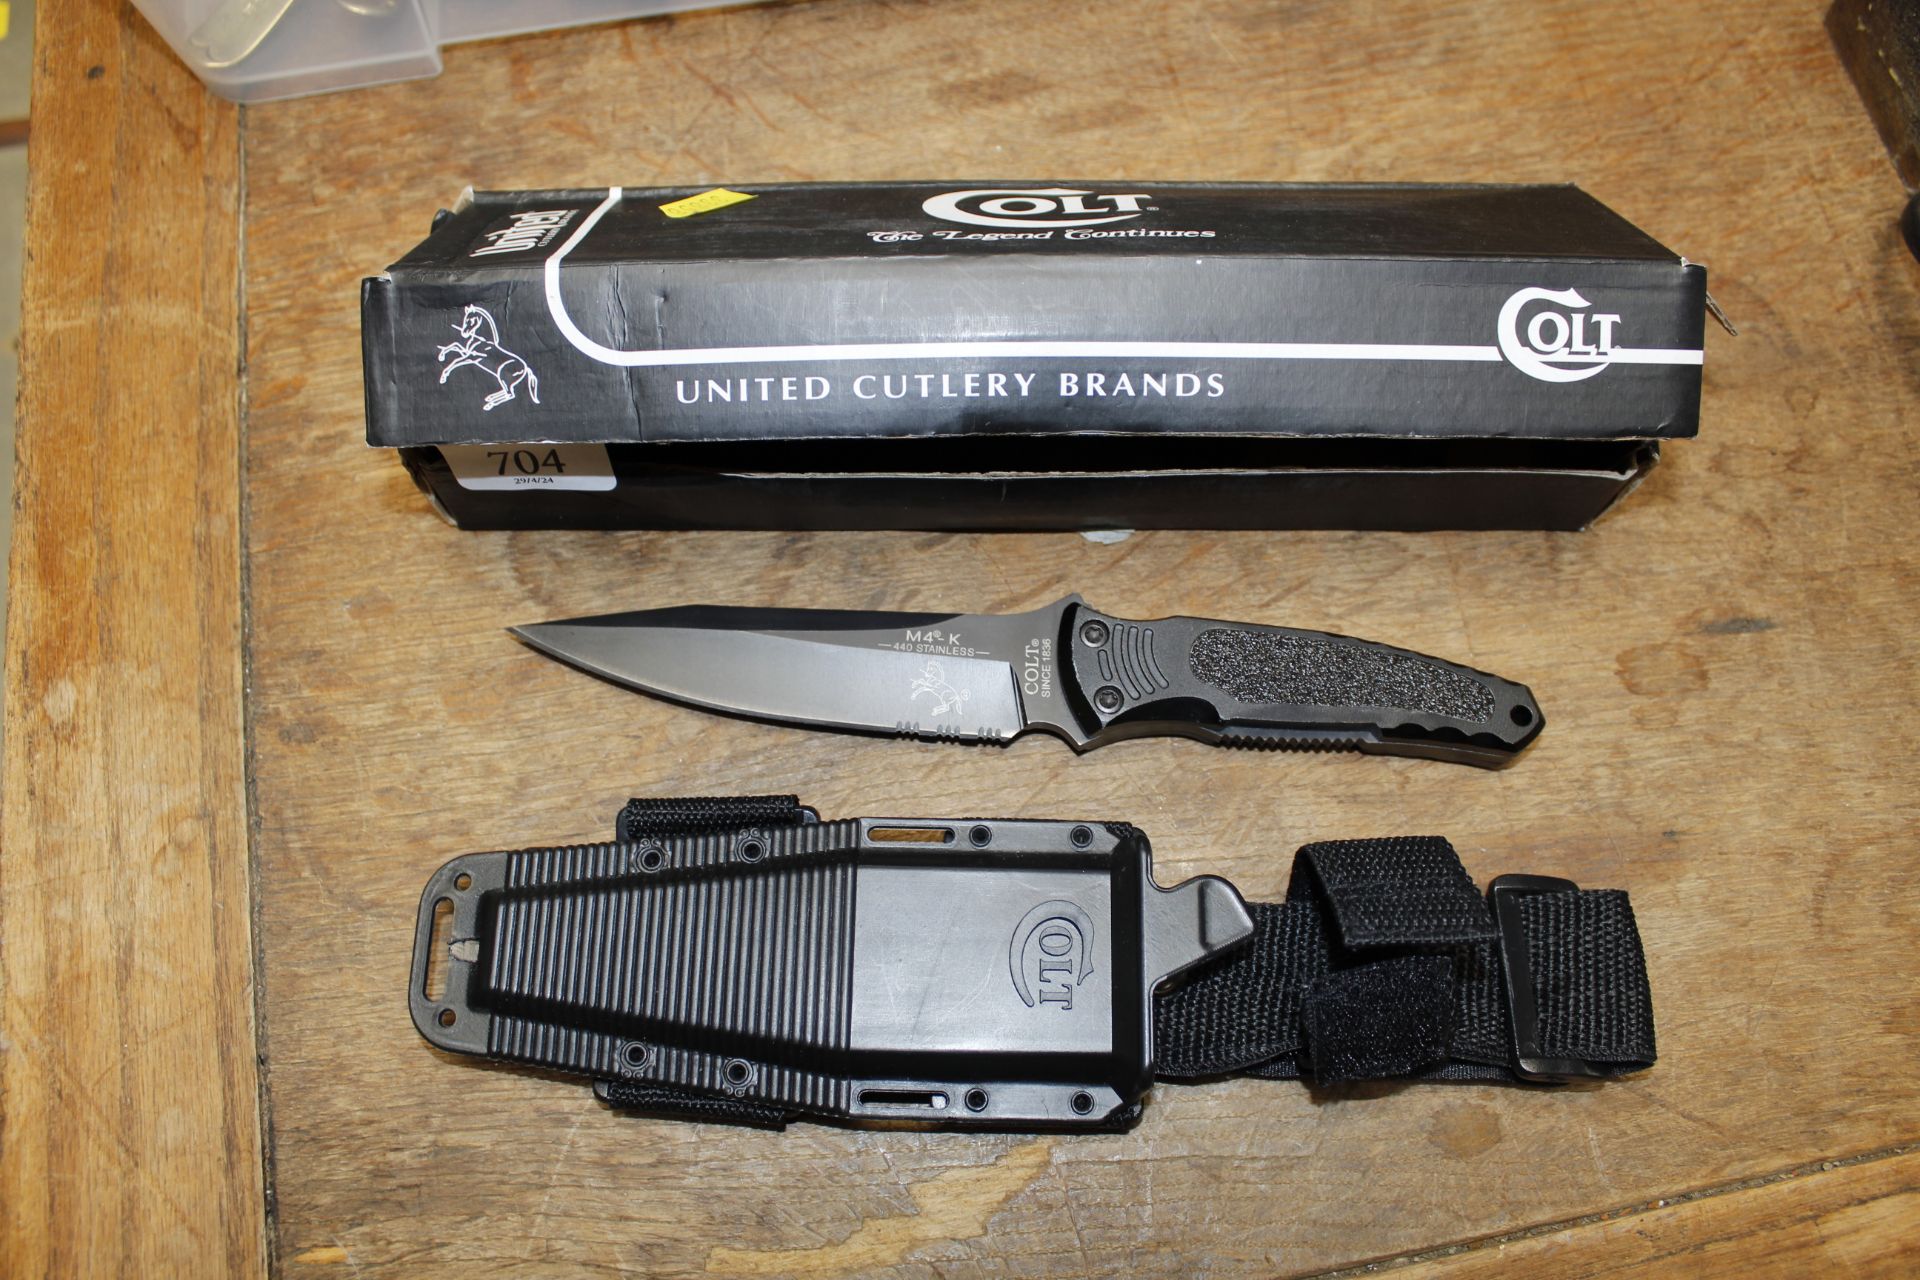 A boxed Cult knife